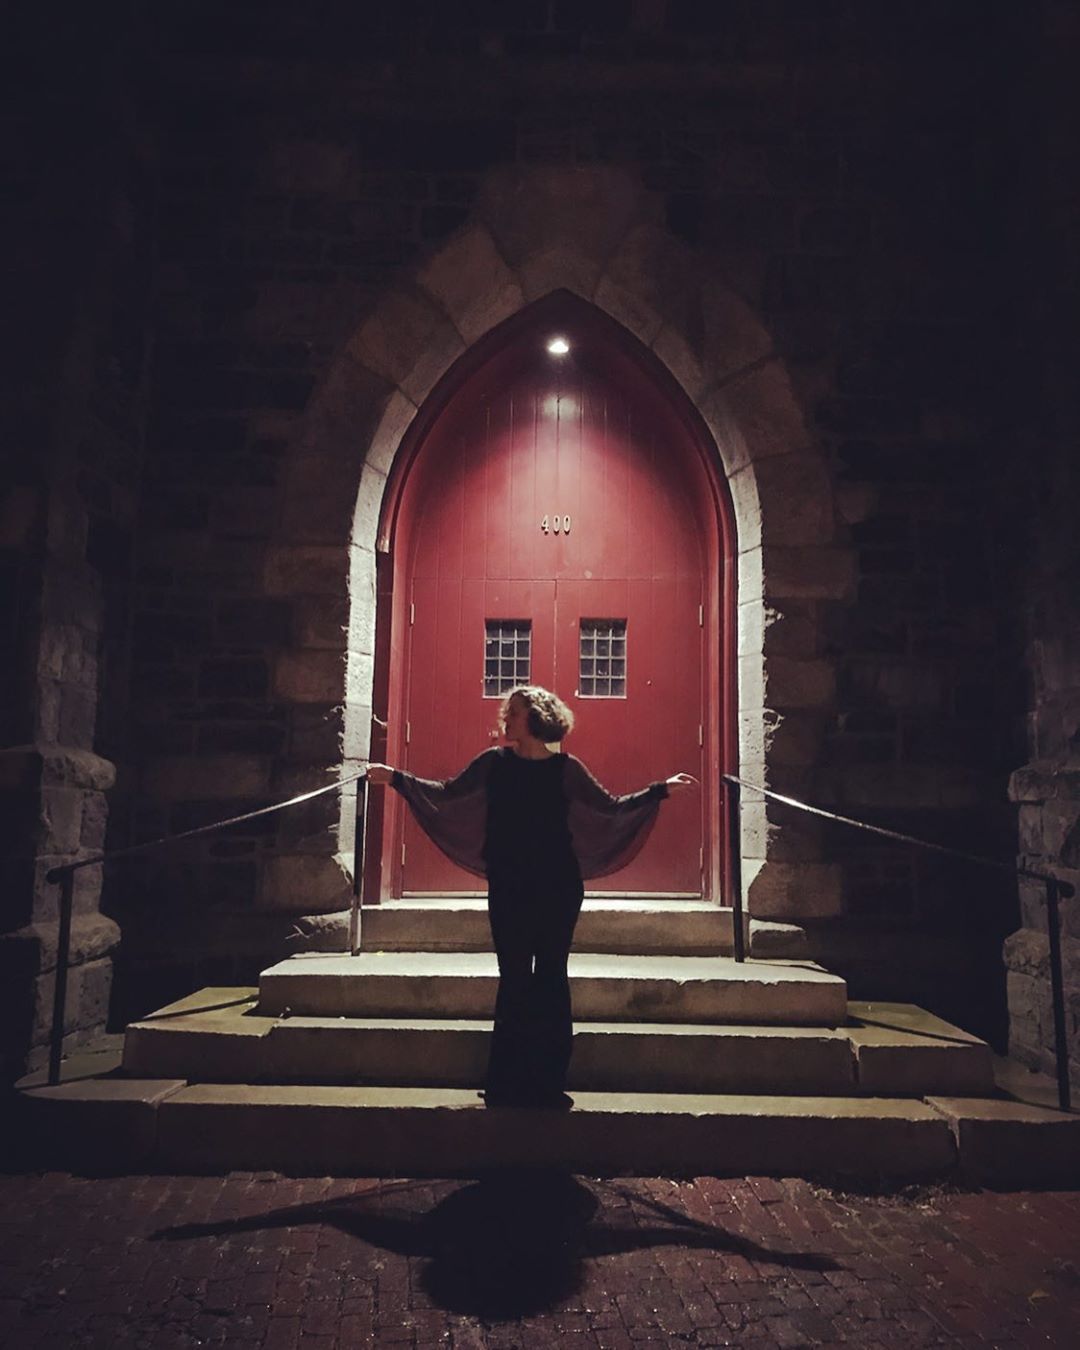 “The cathedral was where it began. It would, incidentally, be where it ended, as well. Before the end of all things, though, there was only this: a Saint had come, and it was the priest’s fault.” . Walked past a stone church with a red door tonight,...